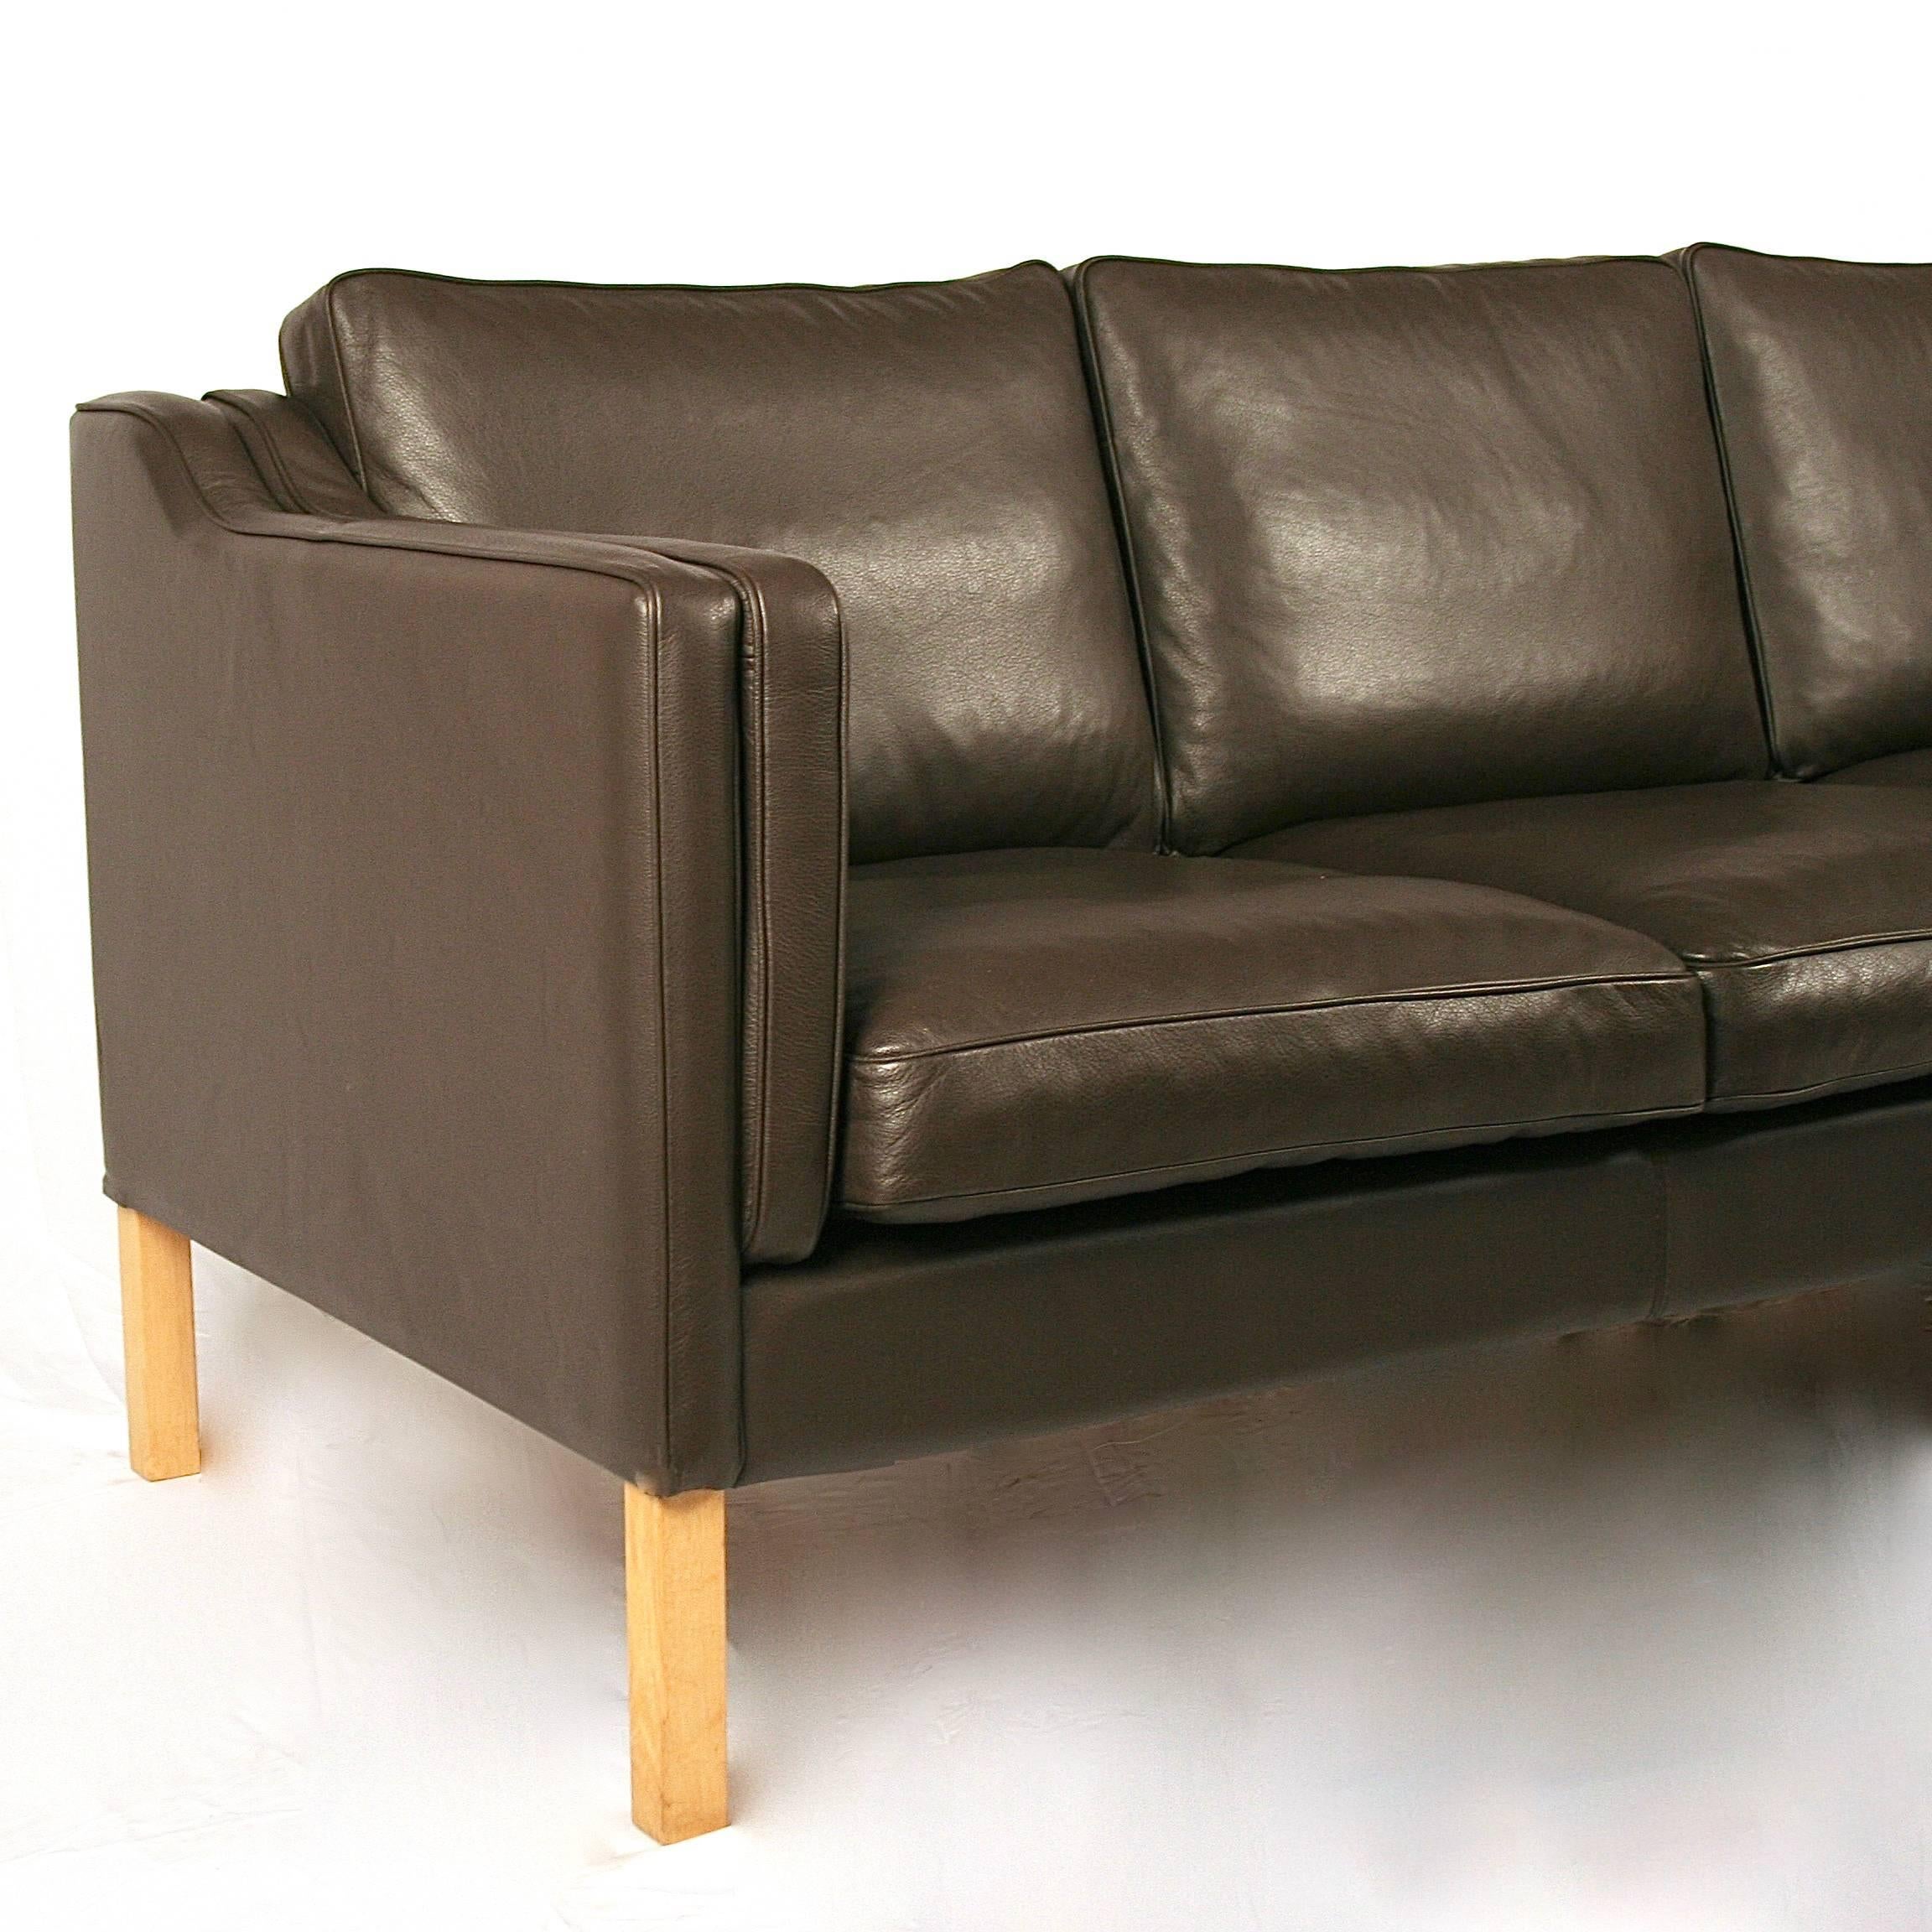 Vintage Danish Chocolate Brown Leather Three-Seat Sofa In Excellent Condition For Sale In Vancouver, BC